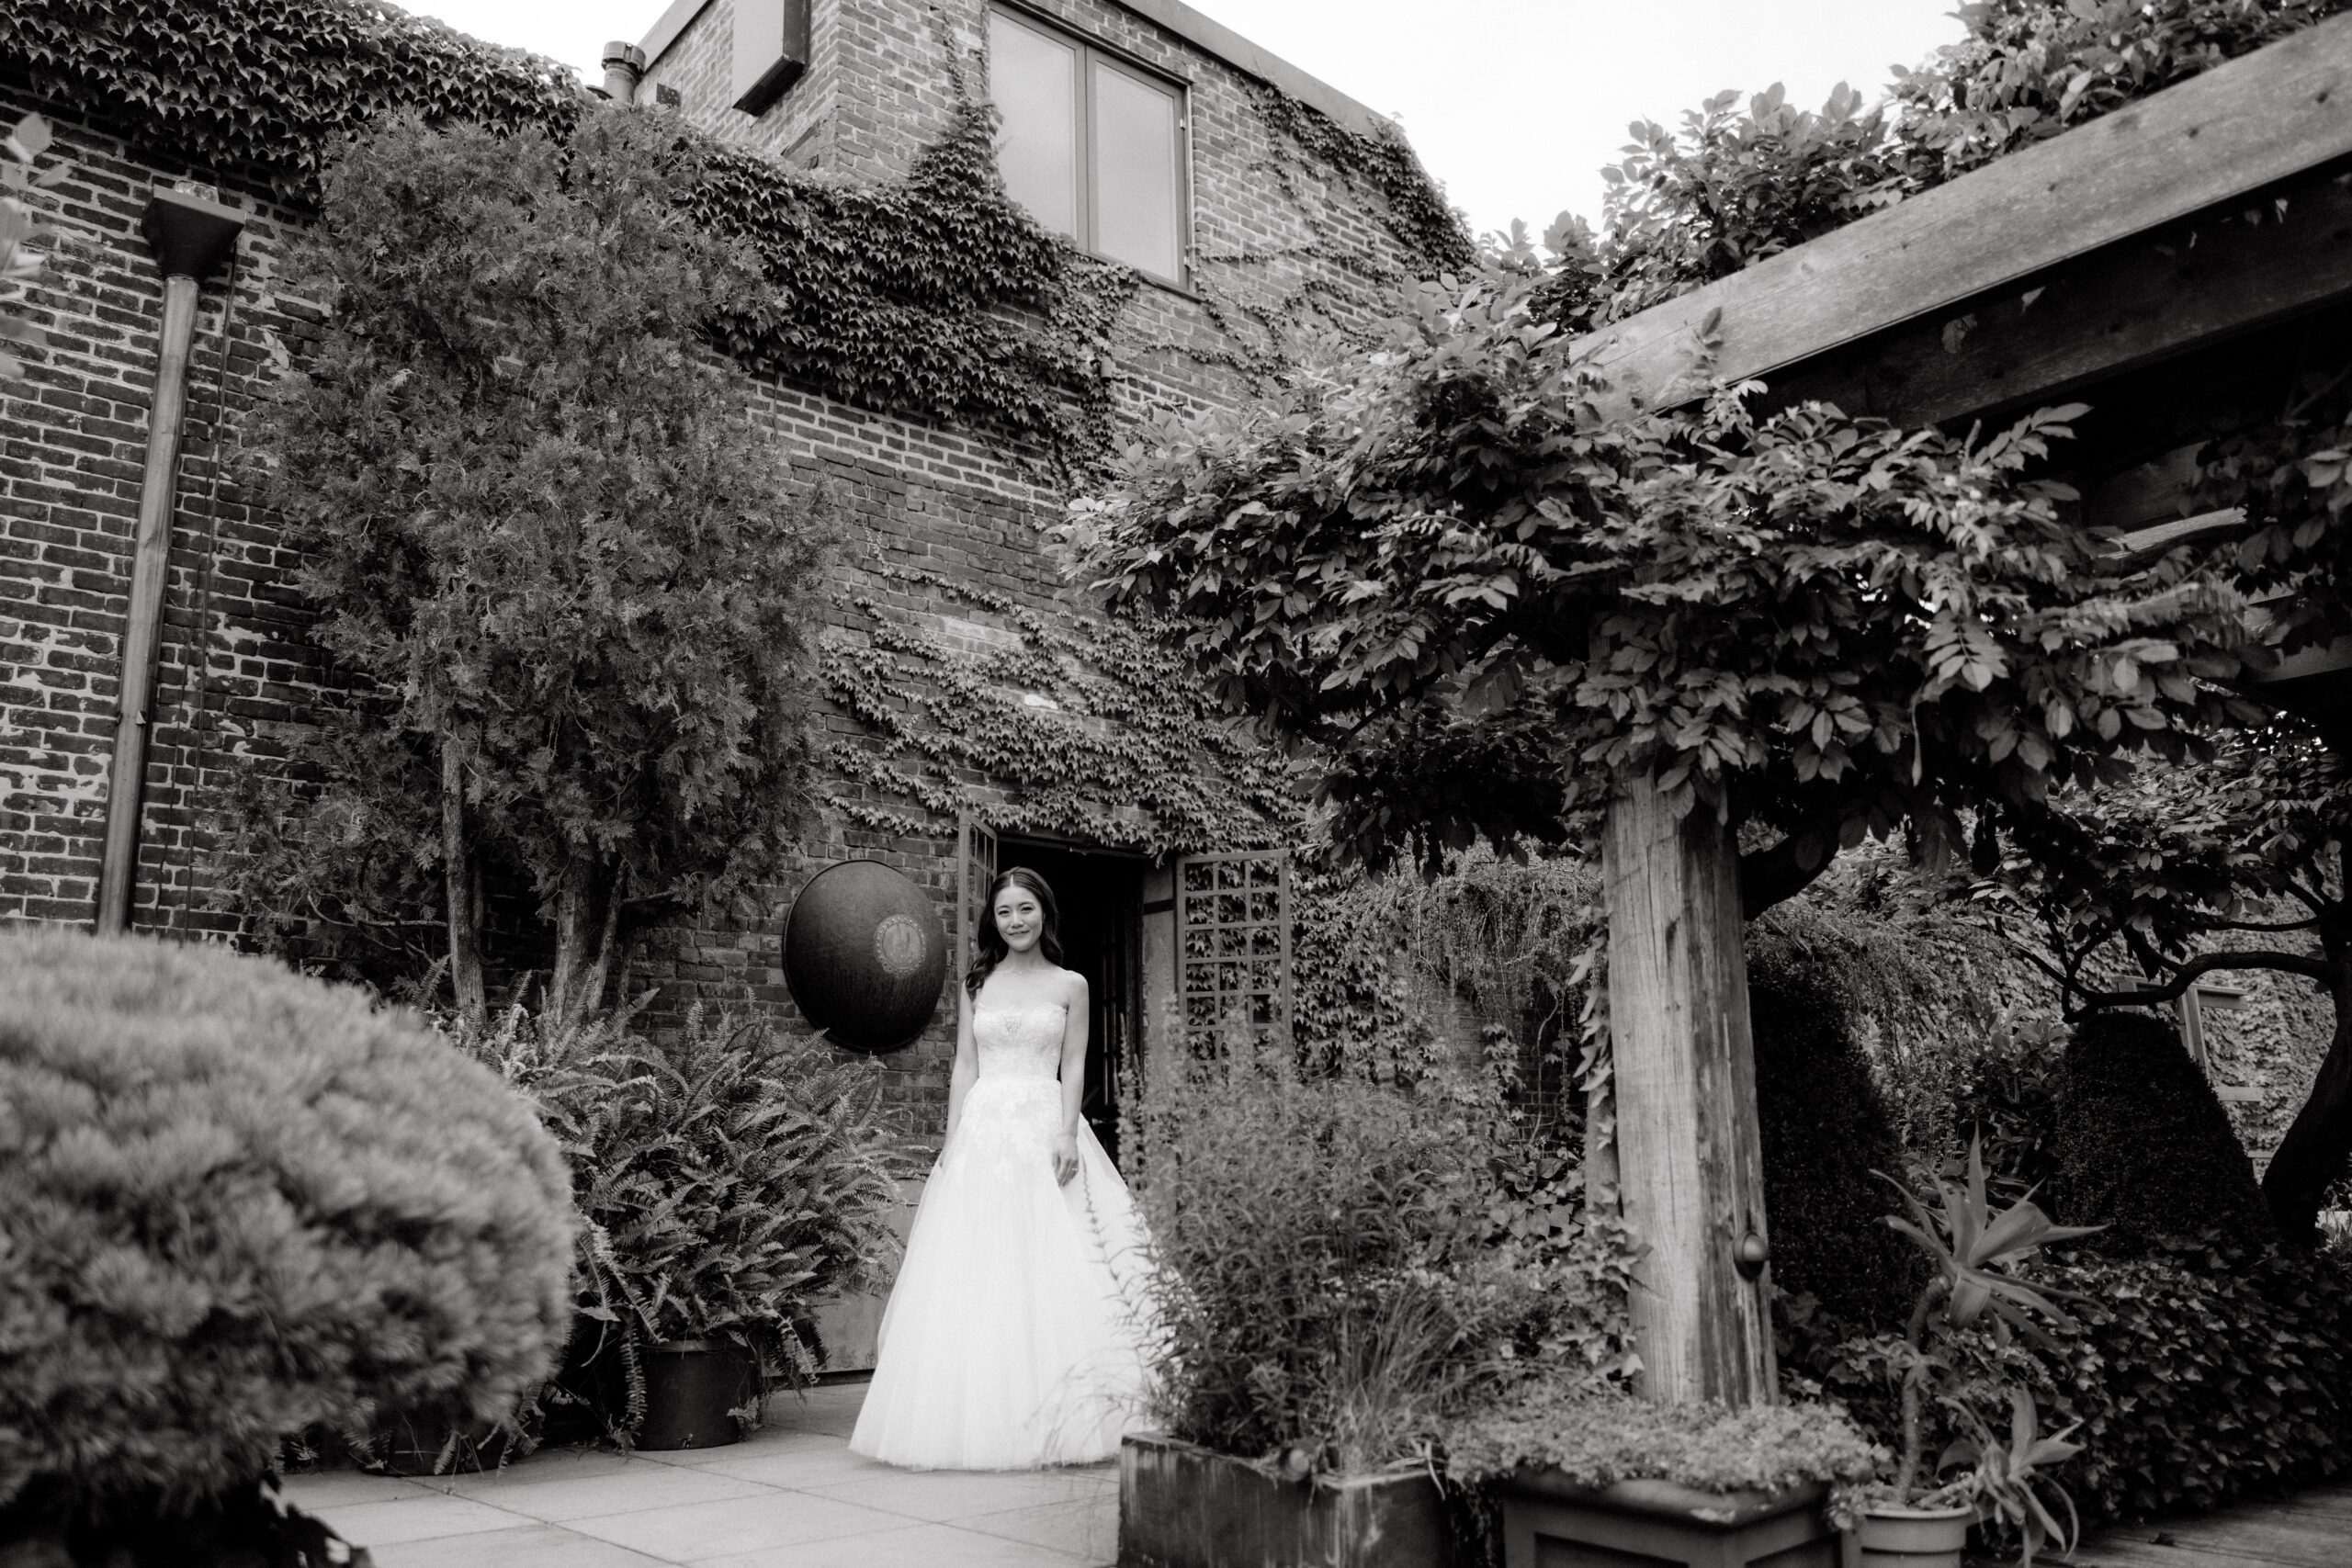 Black and white outdoor portrait of the bride. High-quality wedding photography image by Jenny Fu Studio.